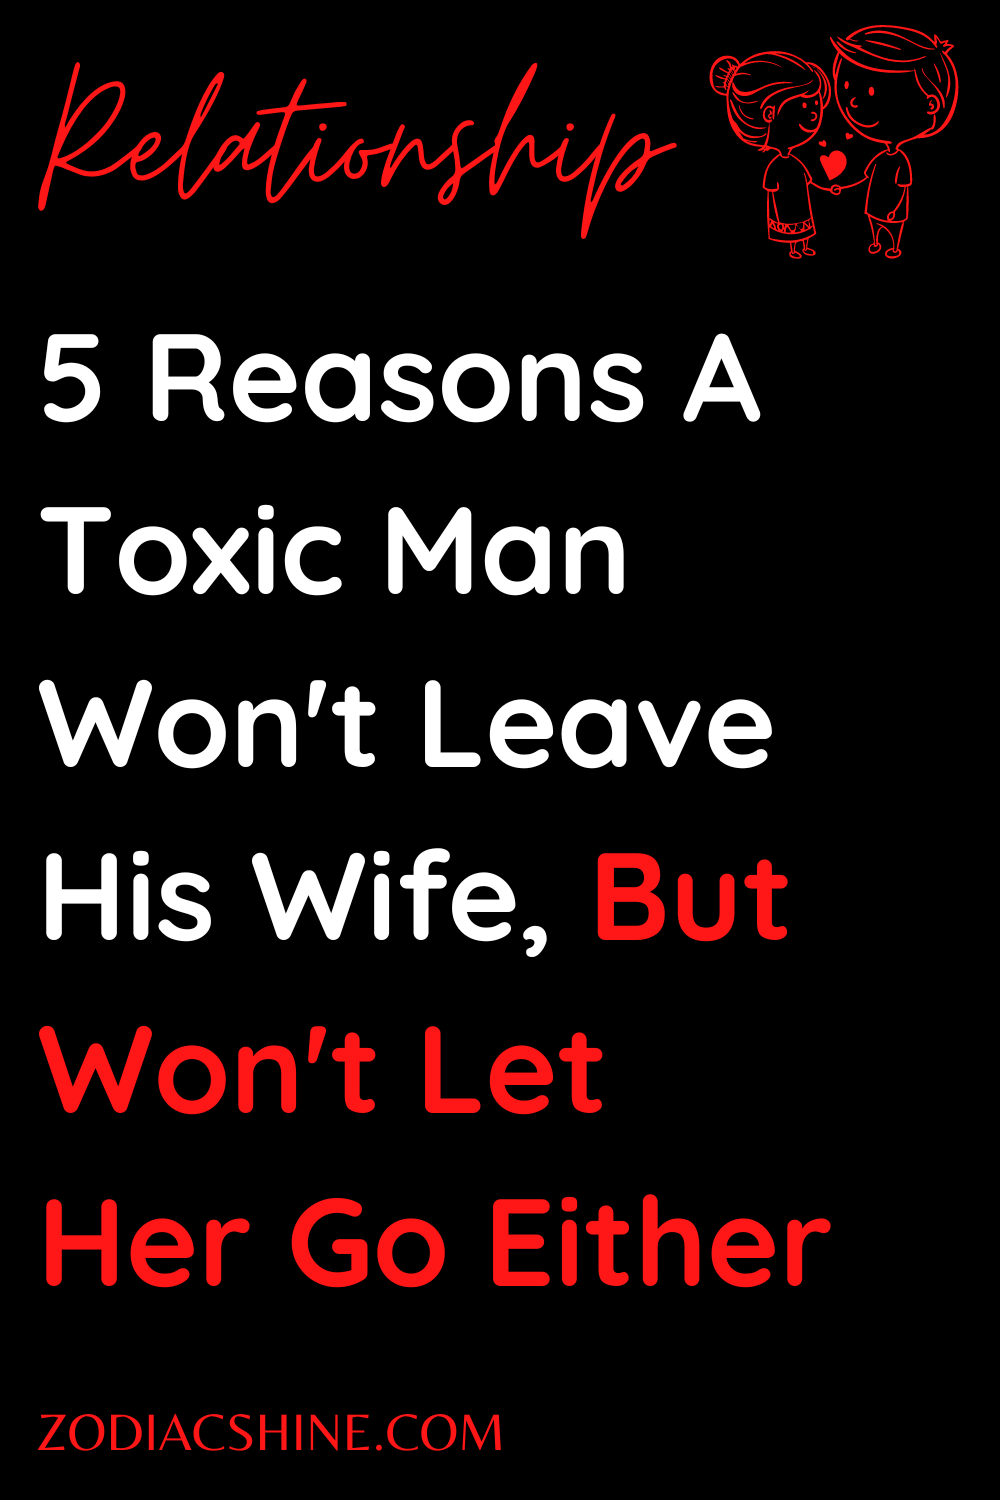 5 Reasons A Toxic Man Won't Leave His Wife, But Won't Let Her Go Either